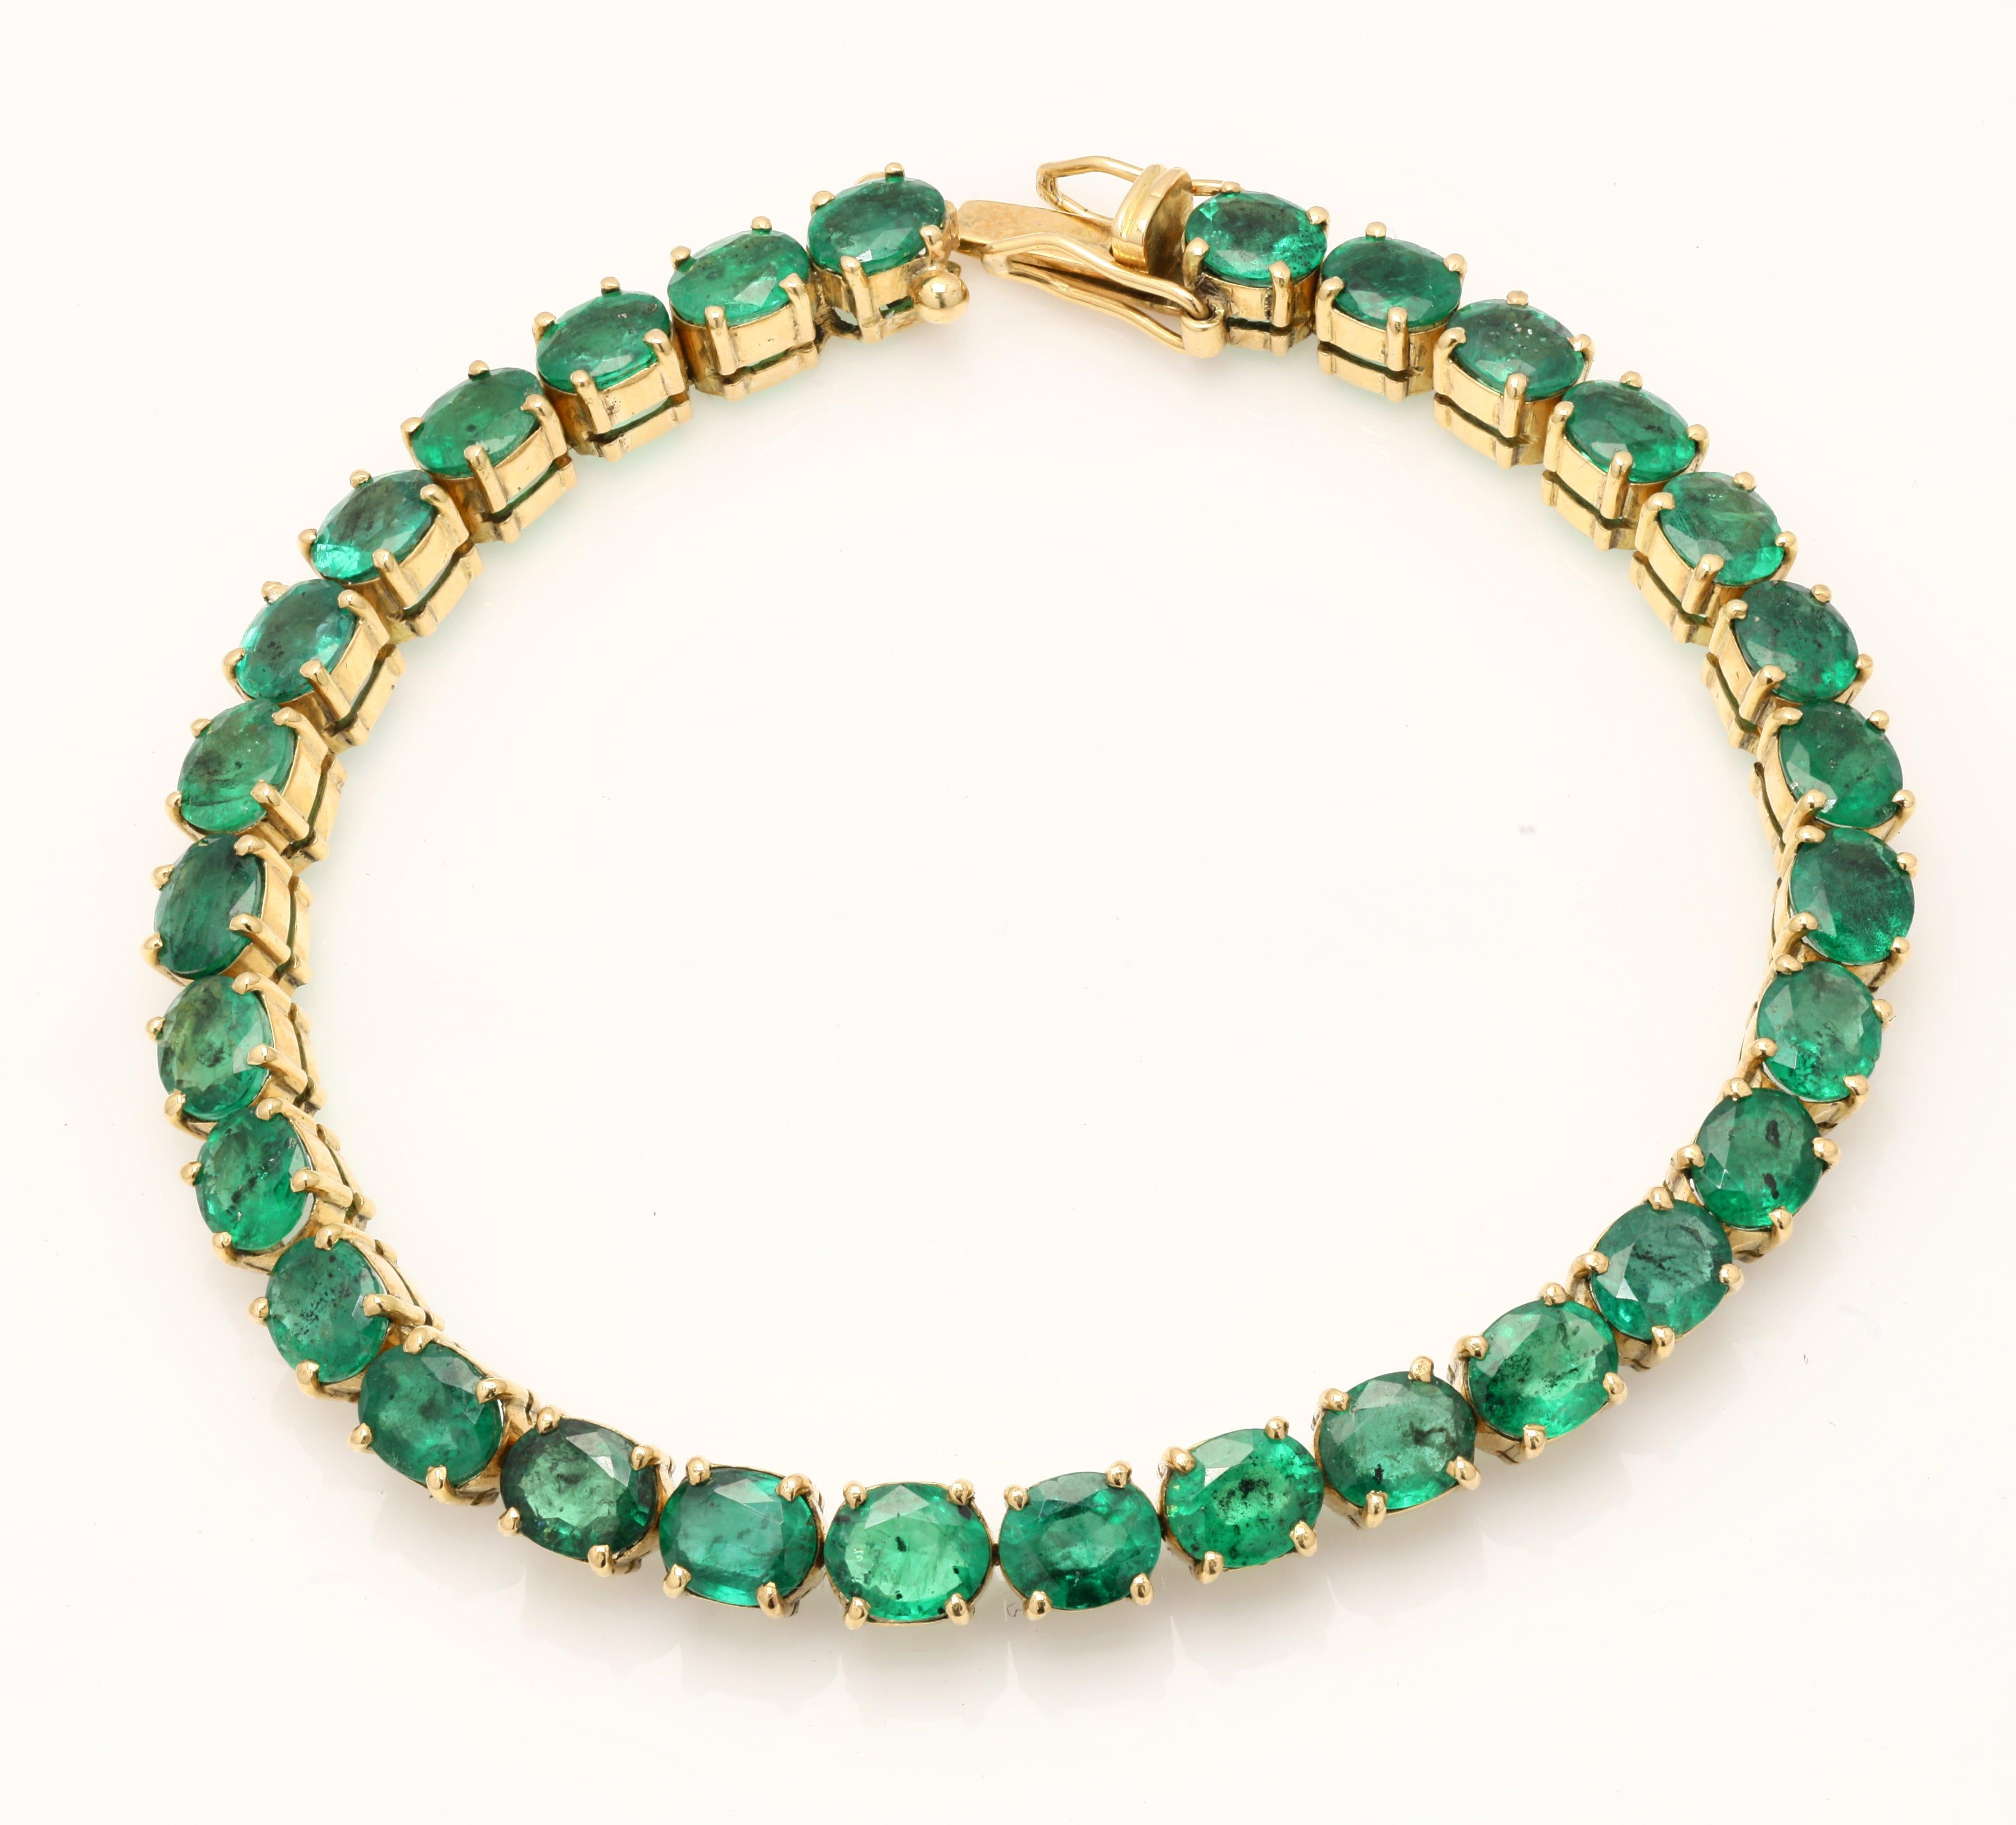 Green Emerald Tennis Bracelet in 14K Gold. It has a perfect oval cut gemstone to make you stand out on any occasion or an event.
A tennis bracelet is an essential piece of jewelry when it comes to your wedding day. The sleek and elegant style